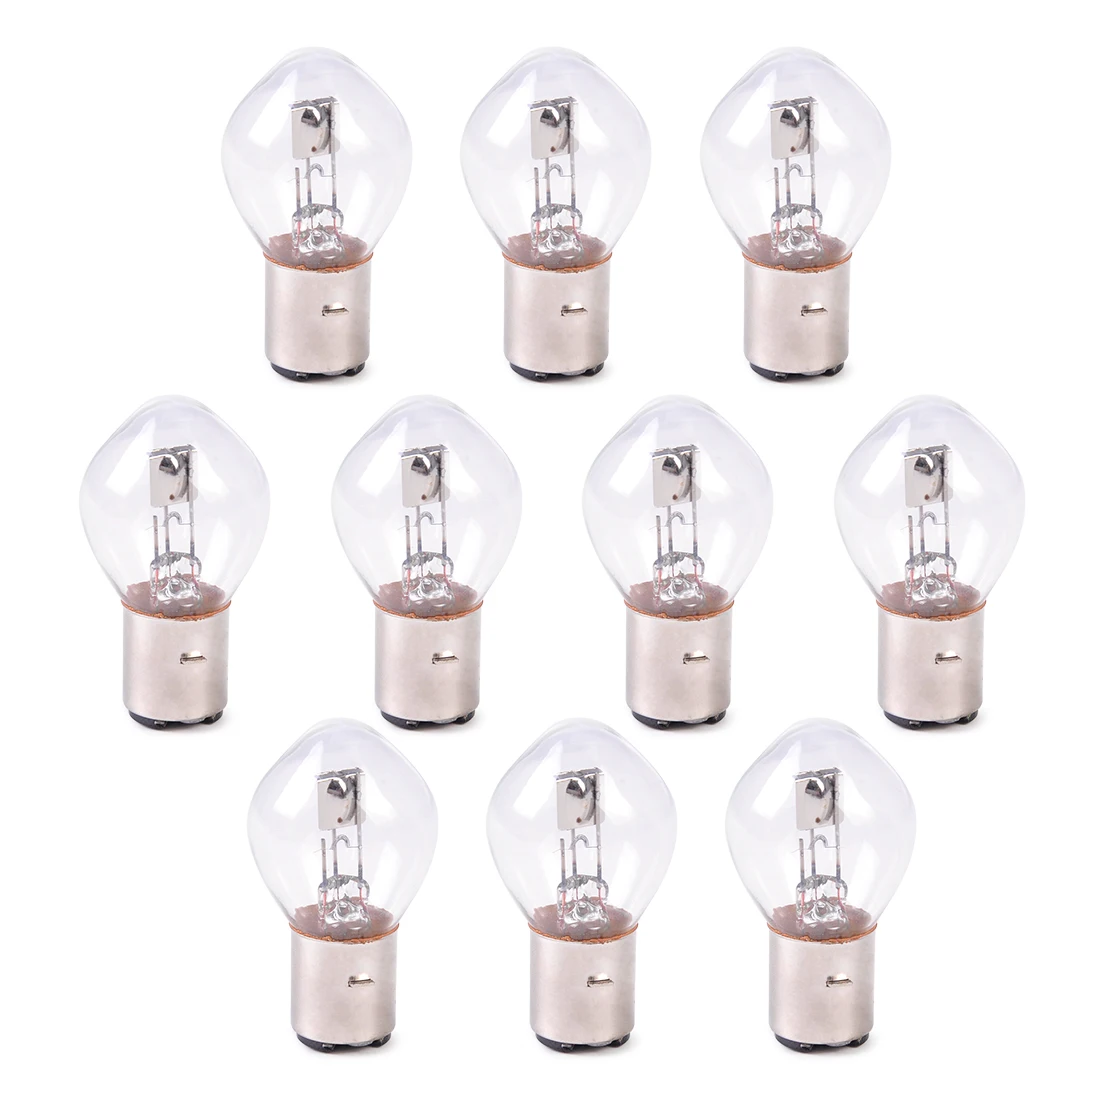 CITALL Motorcycle Lighting 10x Head Light Headlight Bulb 12V 35W B35 BA20D Glass fit for Chinese GY6 ATV Moped Scooter